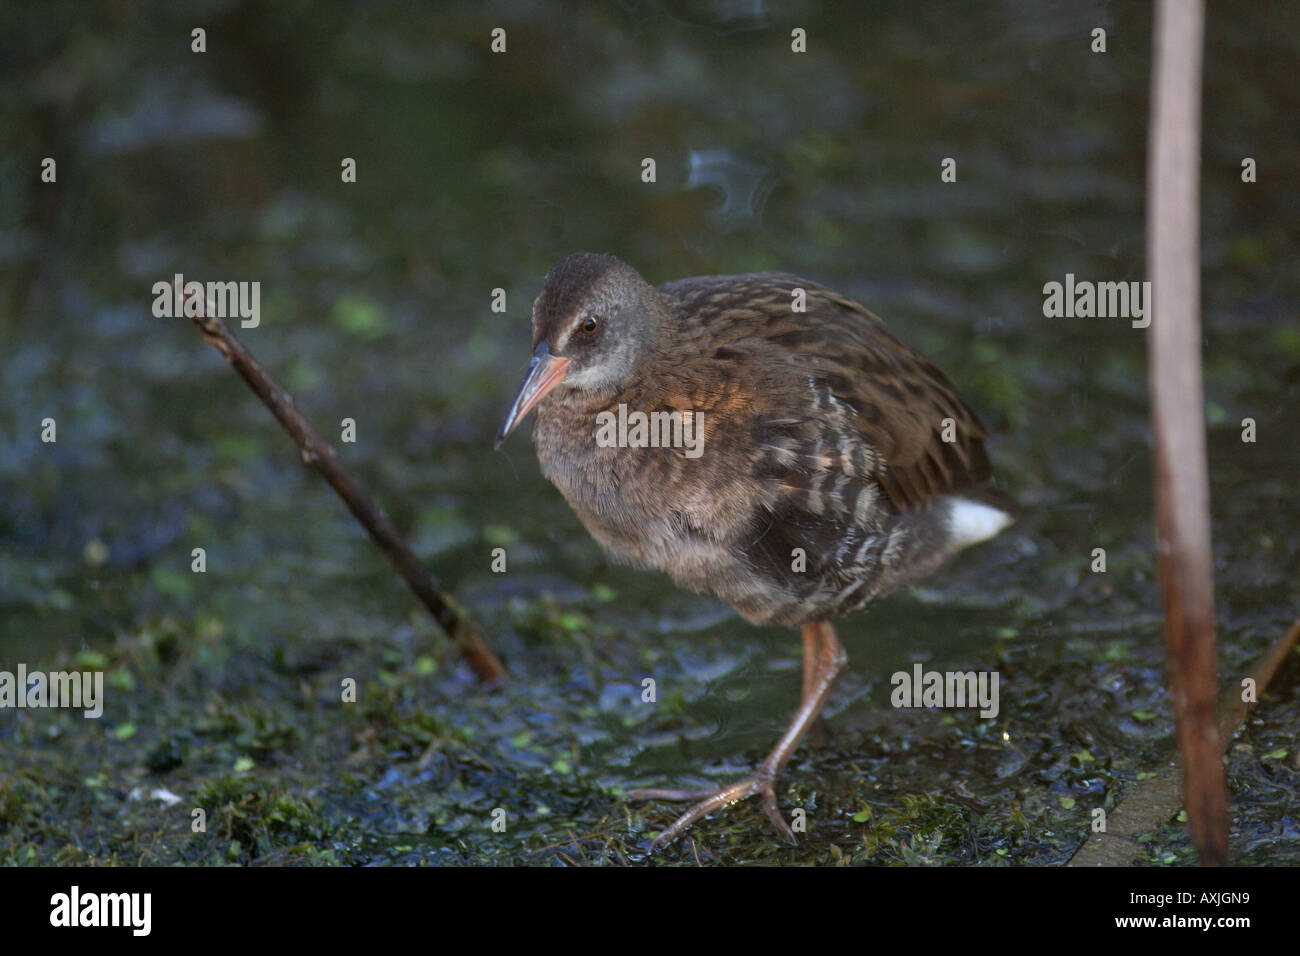 a very shy and secretive bird, skulking around in reedbeds in Europe. Stock Photo